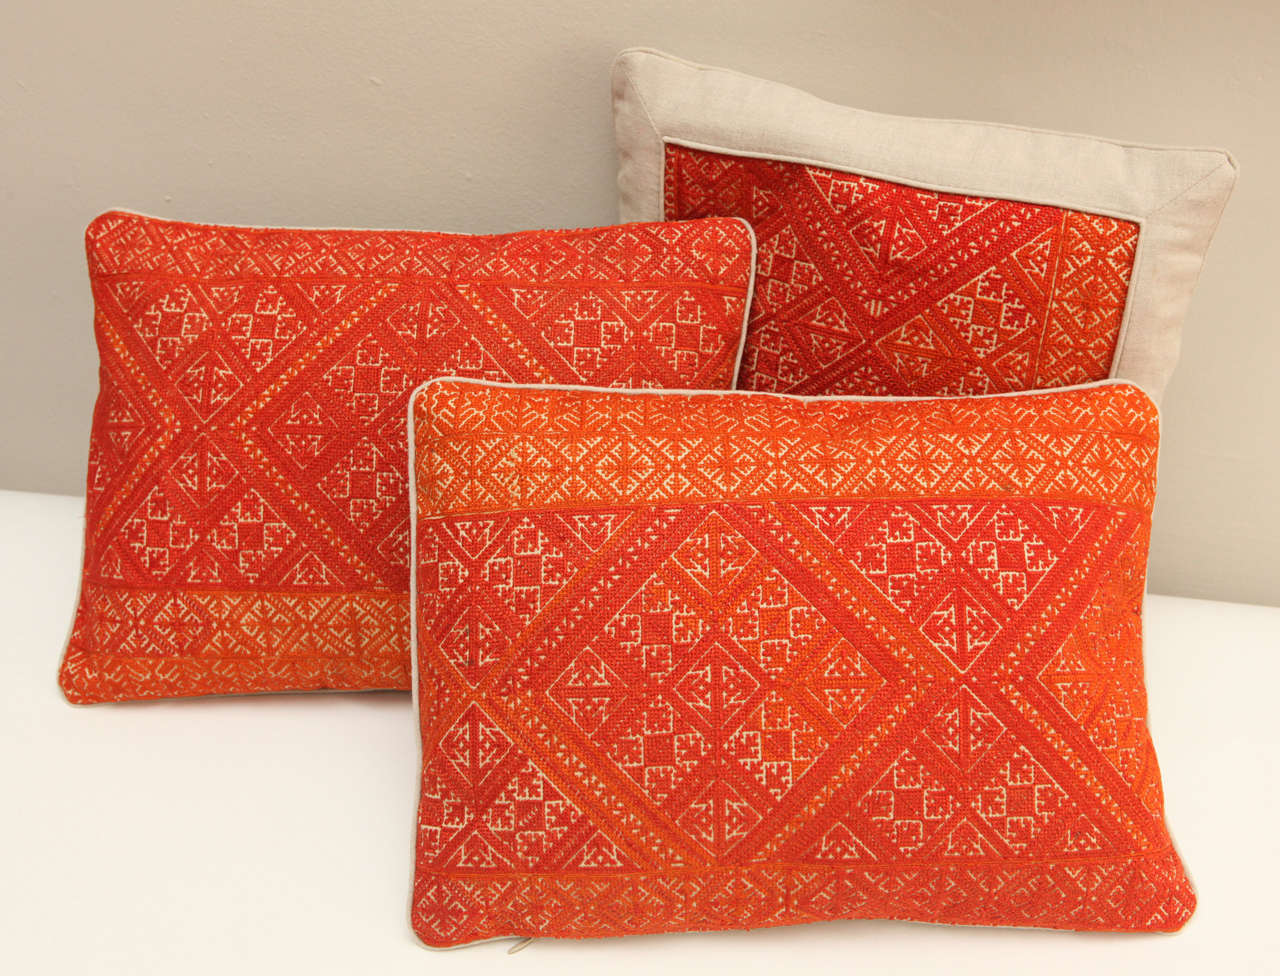 Vintage Moroccan textiles from the City of Fez.  Two shades of orange.  Intricate all over cotton on cotton embroidery produces a durable fabric.  The designs are based on centuries old Mehndi (Henna hand tatoo) designs. These pillows are in perfect